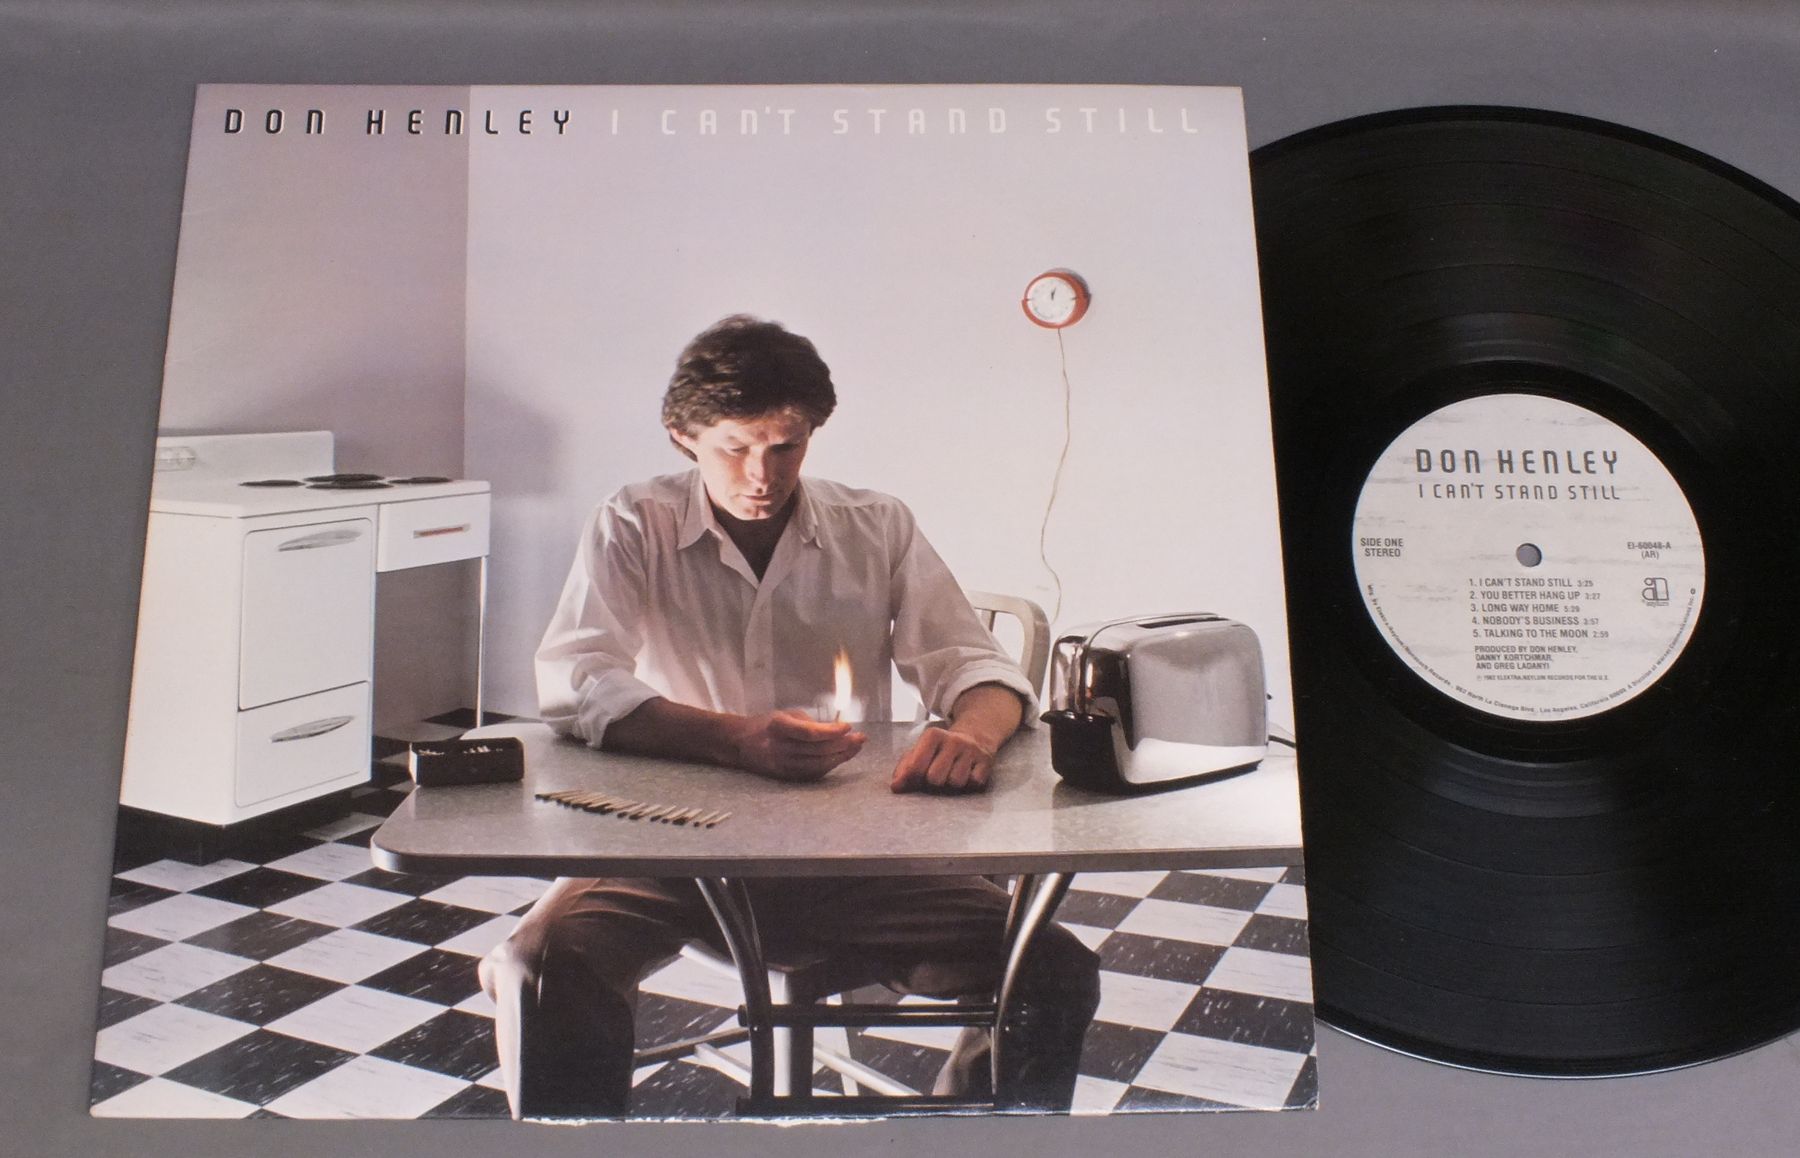 She can t stand. Don Henley i can't Stand still 1982. I can't Stand still Дон Хенли. Donda LP. Dirty Laundry don Henley.